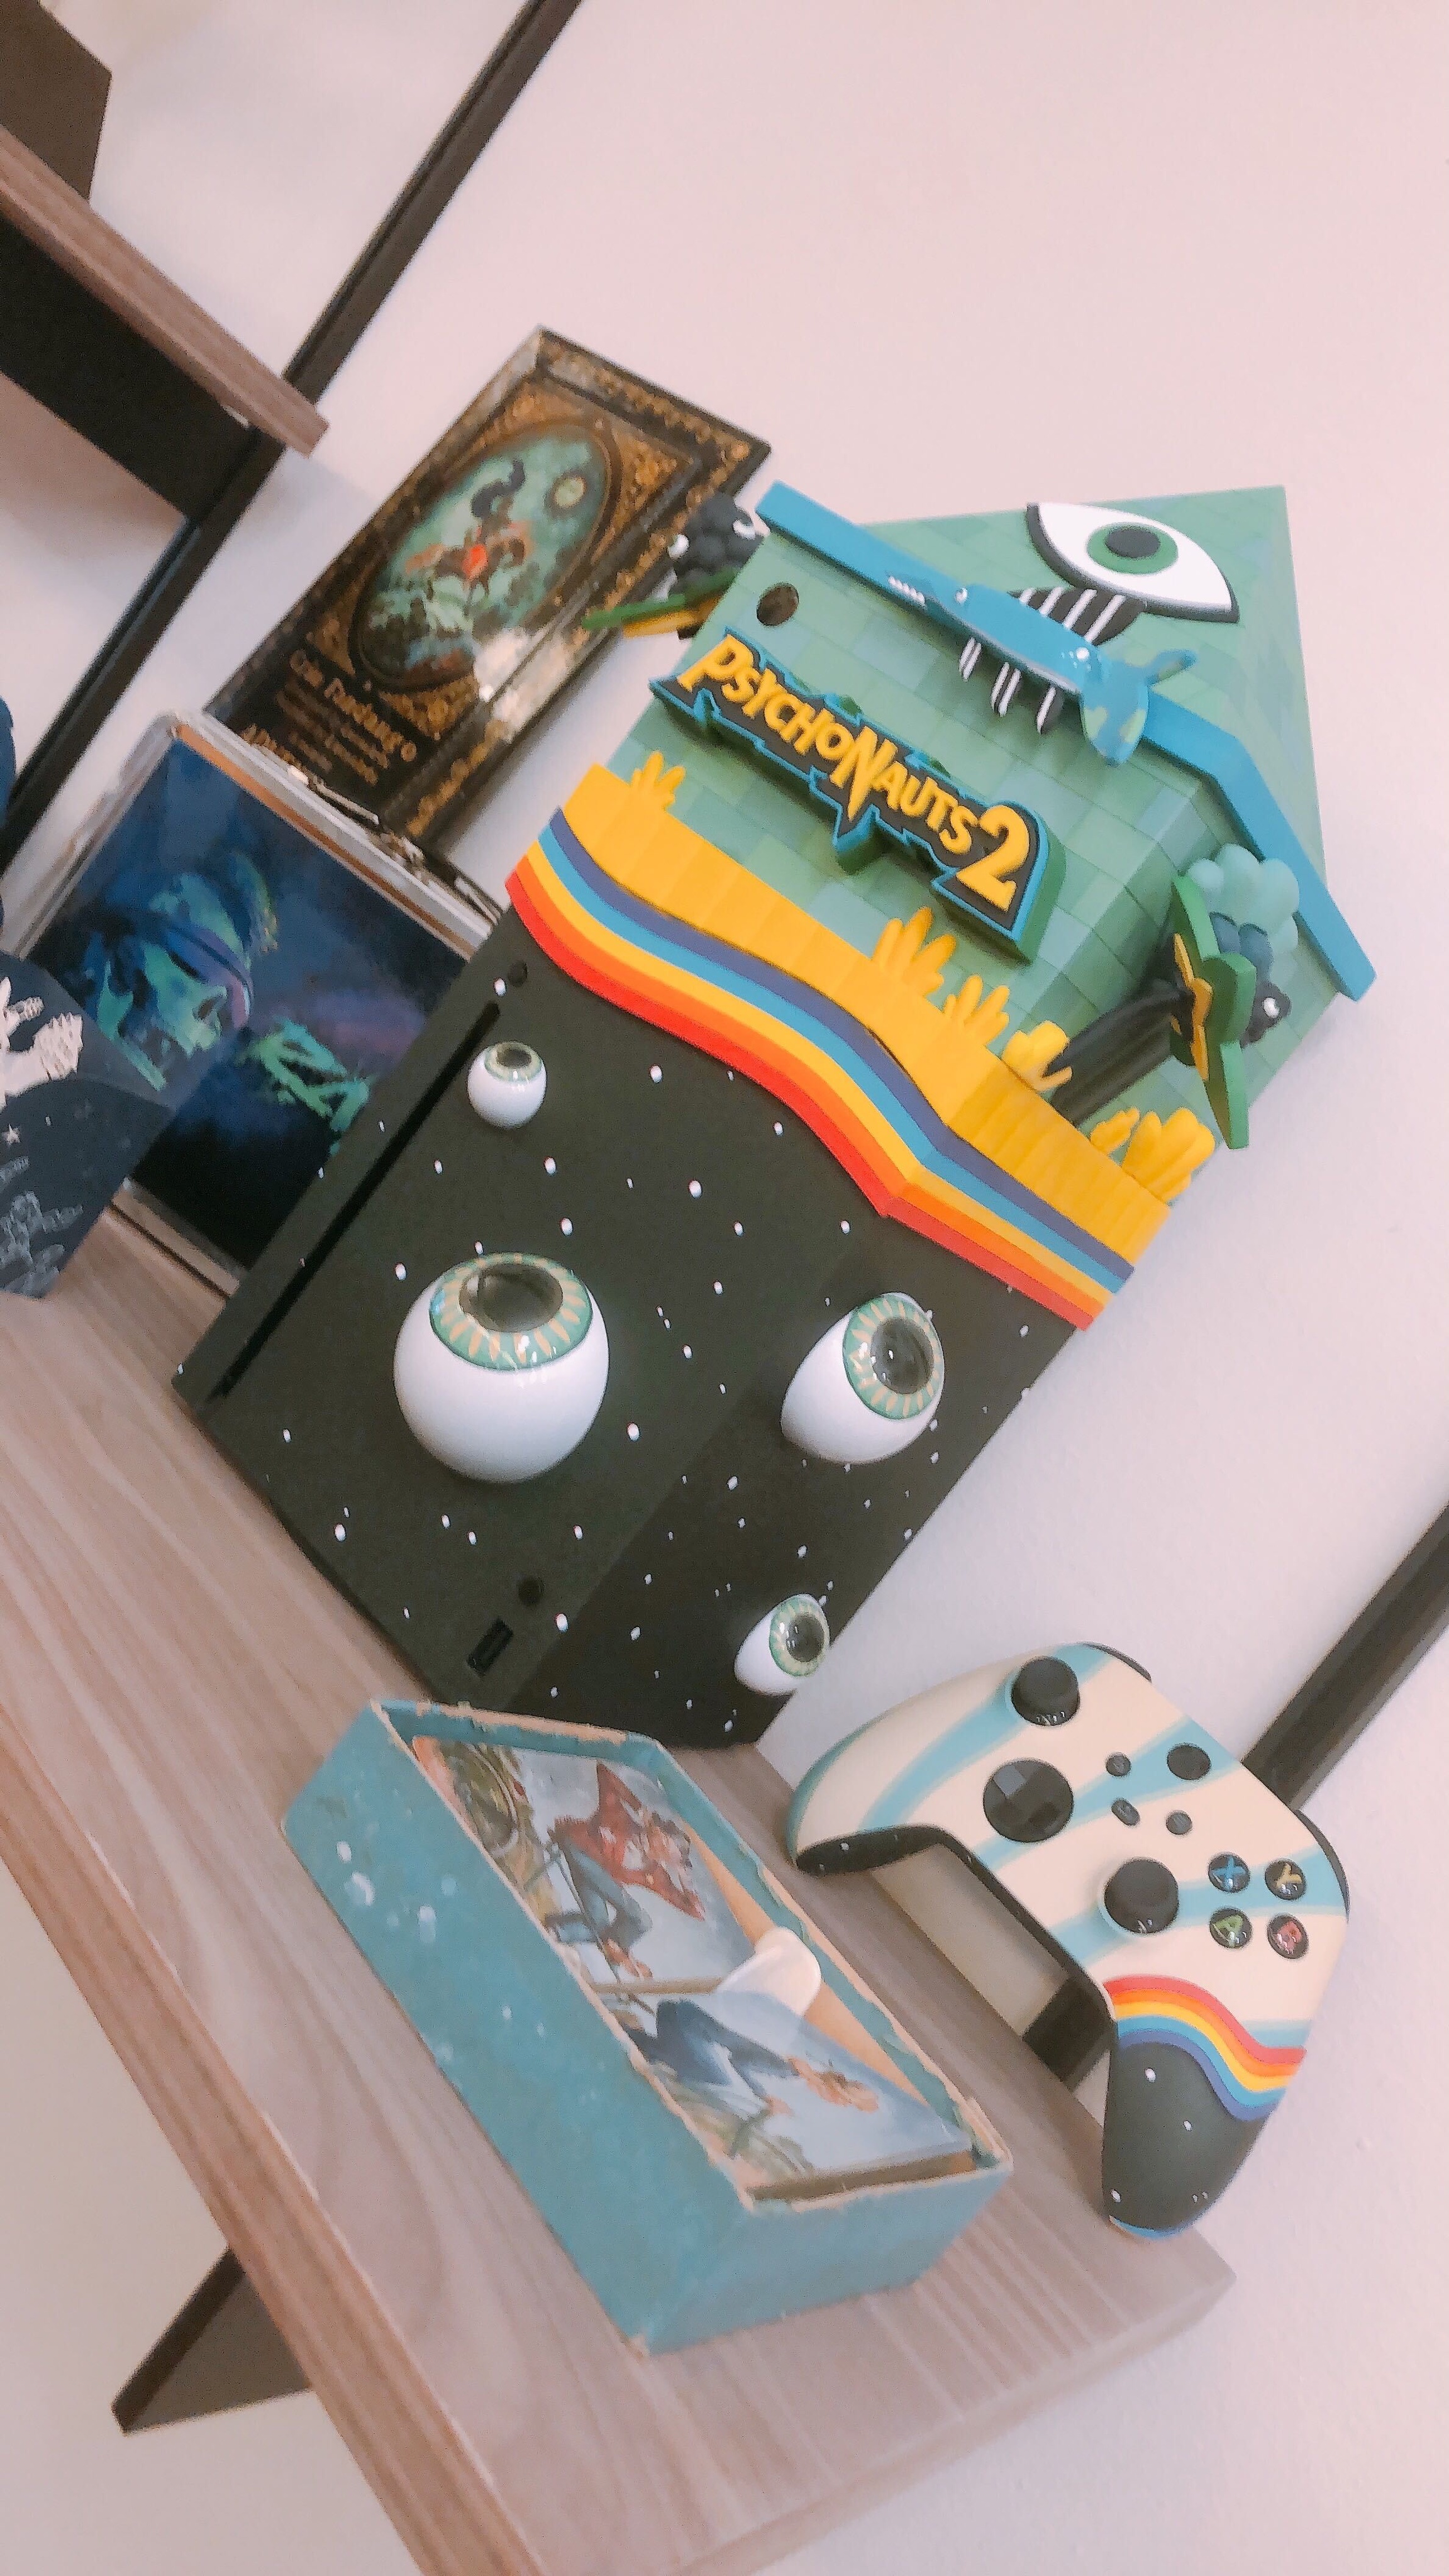 Verbanning Uitdrukking De andere dag Double Fine on Twitter: "behold the psychonauts 2 xbox series x. The  Pioneers Used To Ride These Babies For Miles!! https://t.co/DG4GDcMh7u" /  Twitter